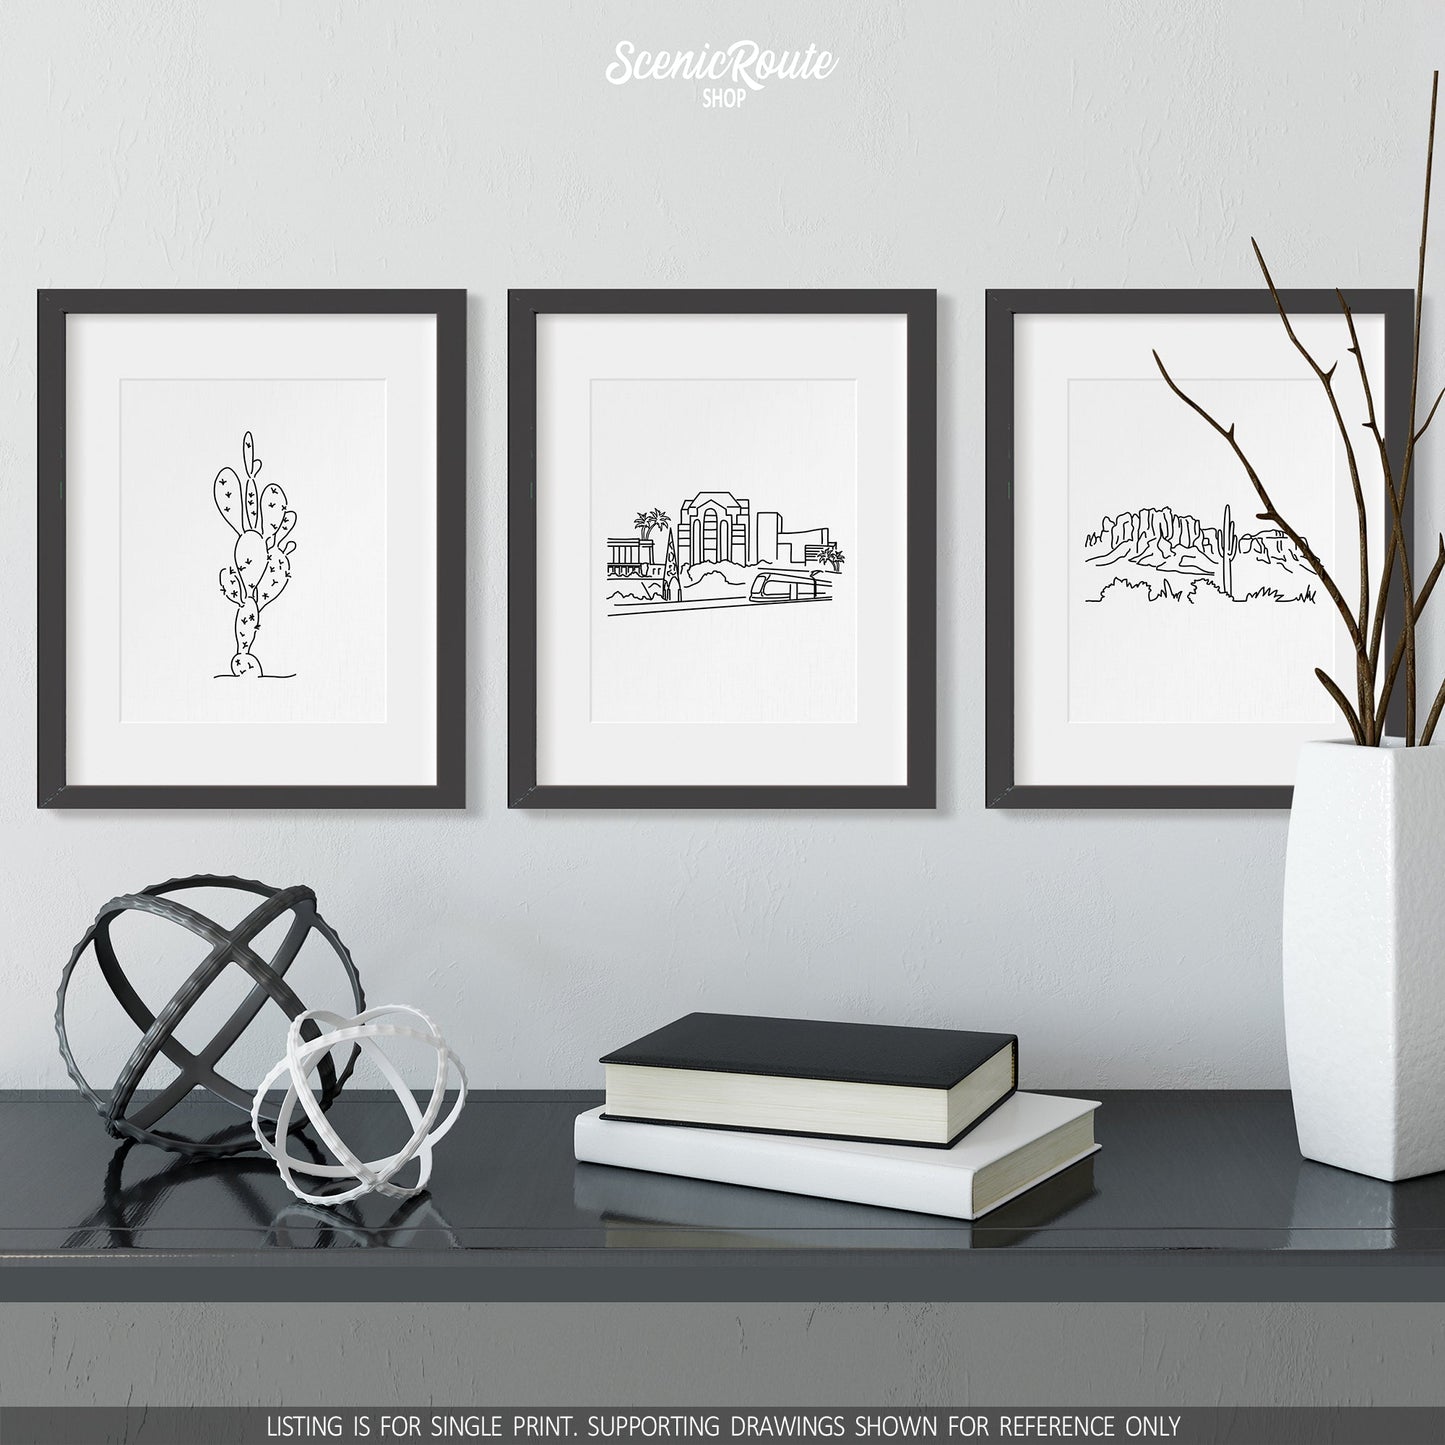 A group of three framed drawings on a wall above a dresser with books and figurines. The line art drawings include a Prickly Pear Cactus, Mesa Skyline, and the Superstition Mountains